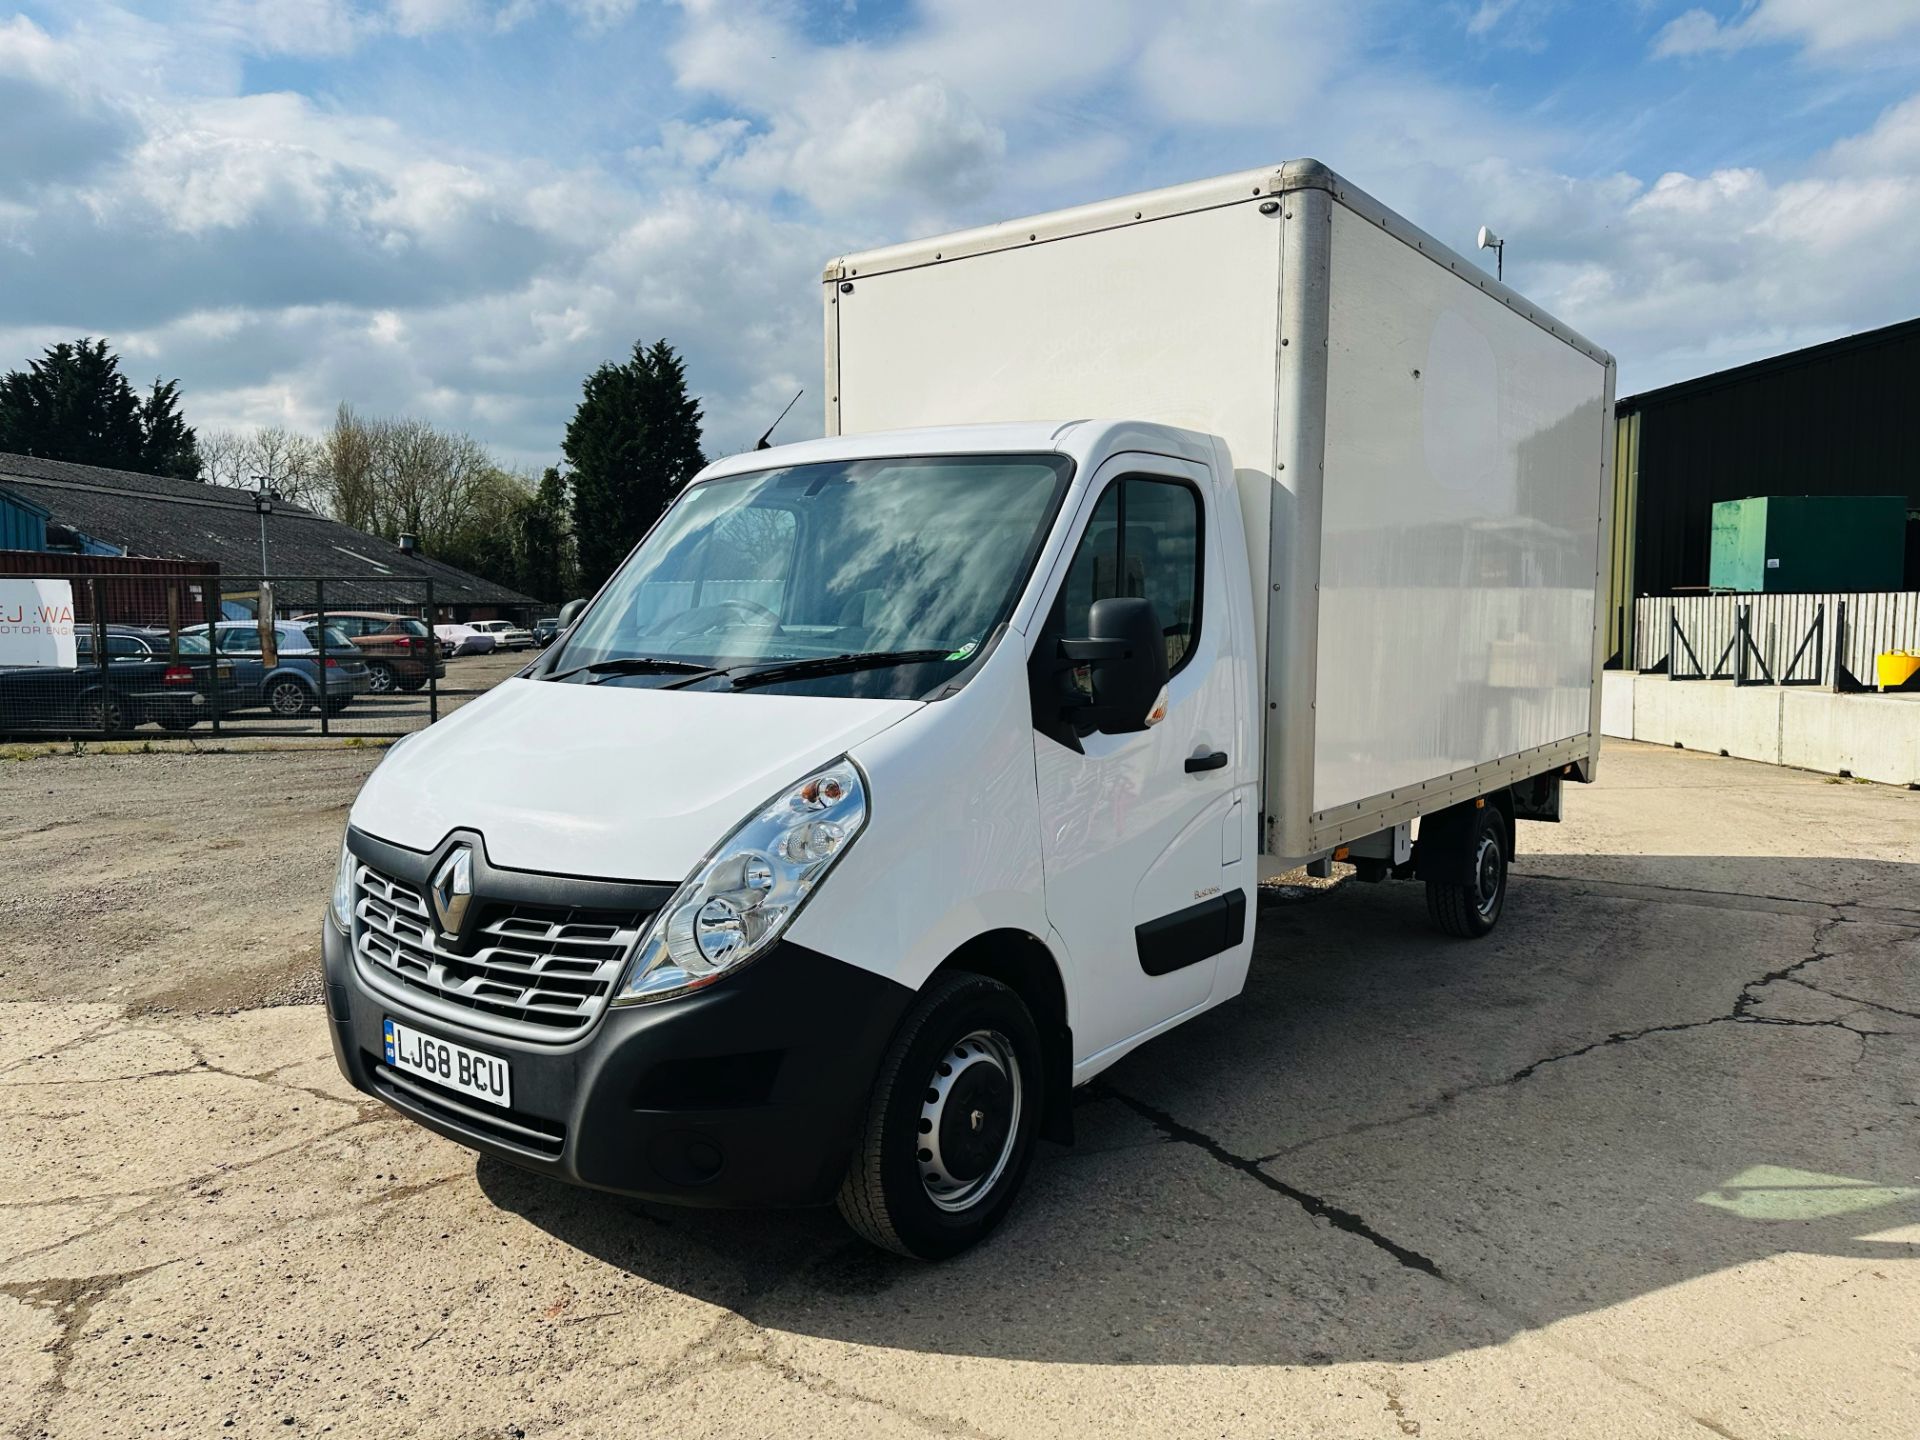 Renault Master 2.3 DCI 130 Business Edition Lwb (Luton / Box Van) - 2019 Model - Euro 6 - Tail Lift - Image 4 of 27